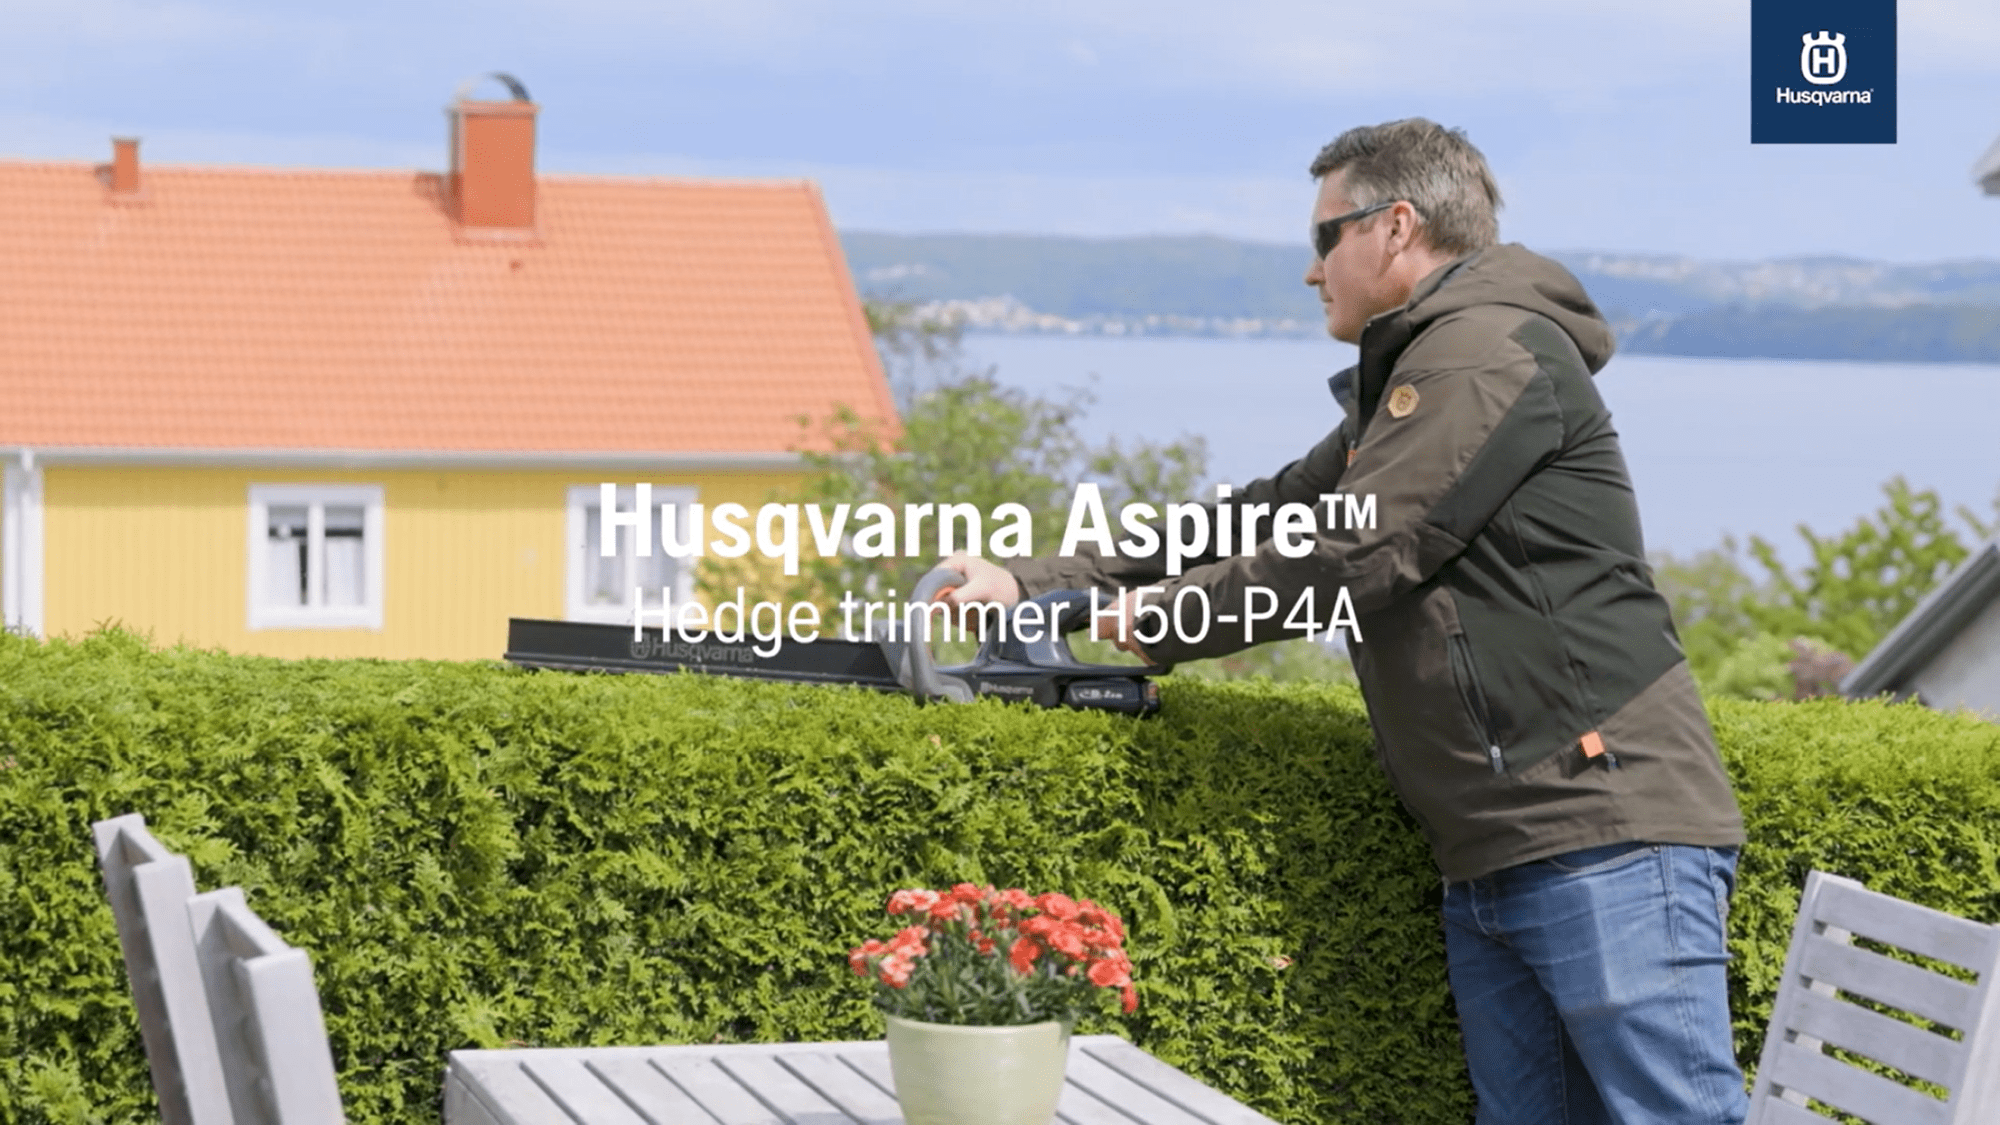 Features and how to use Aspire Hedge trimmer H50-P4A 52S Master